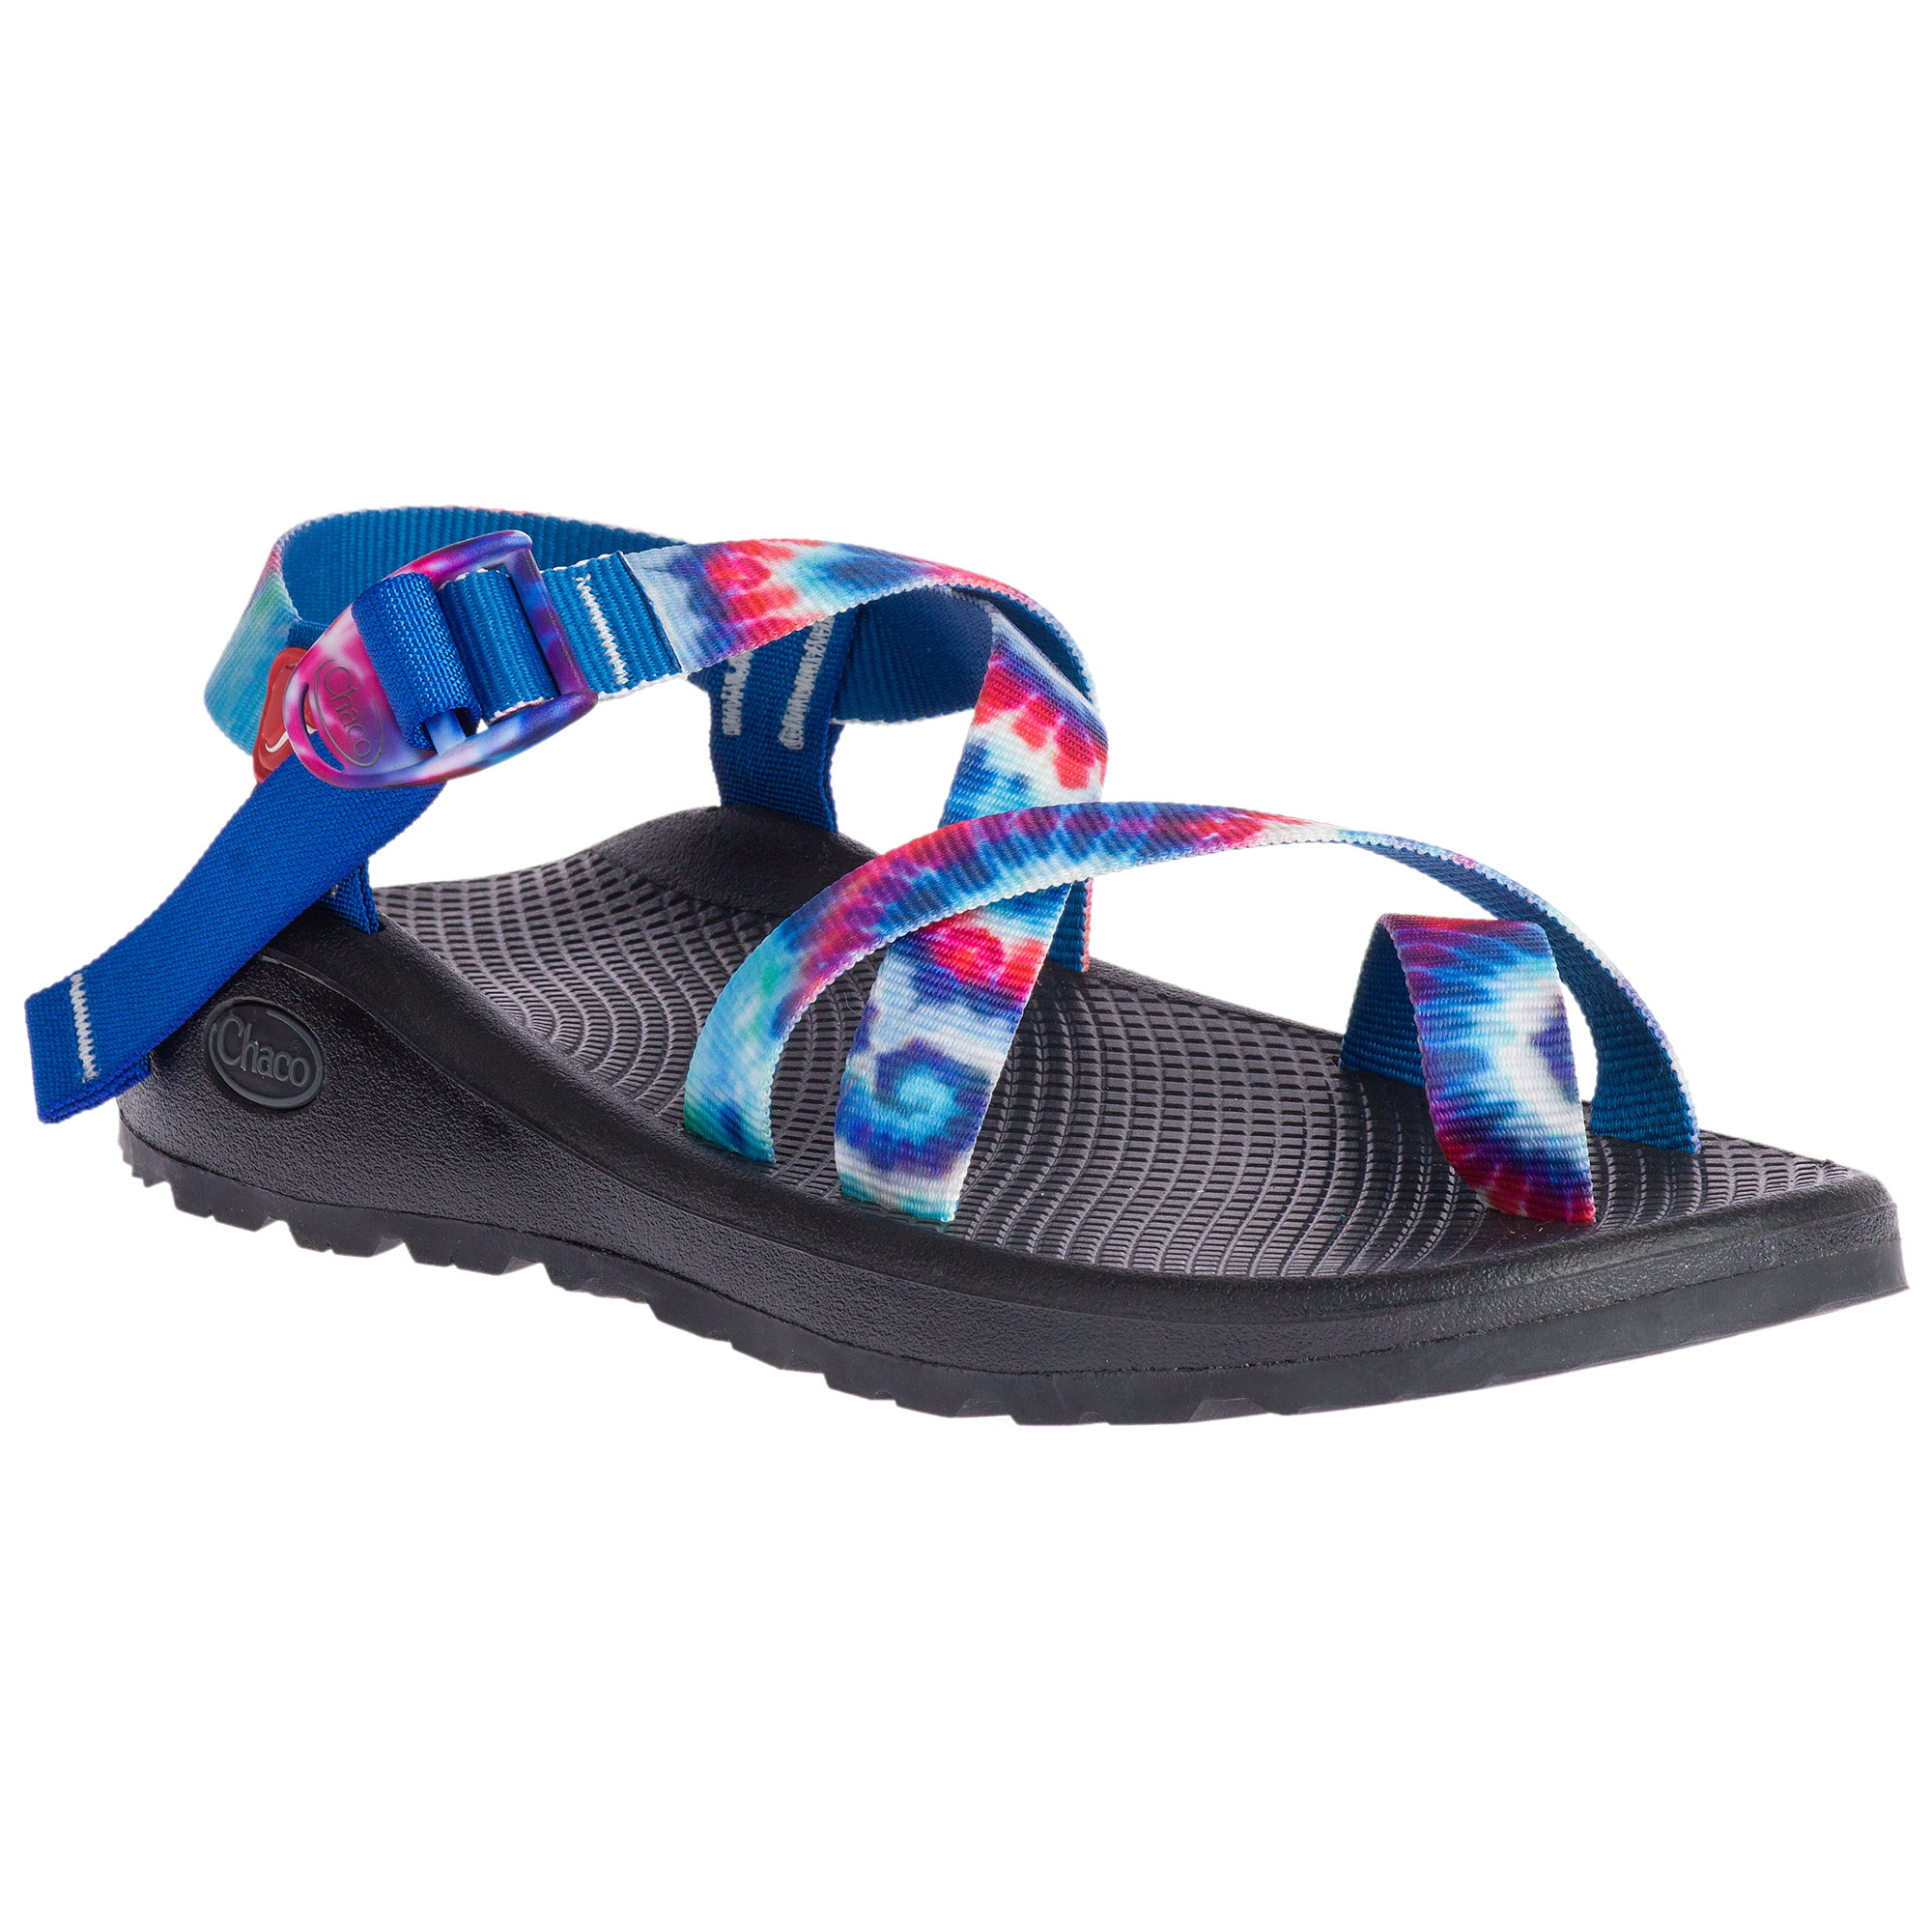 chaco sandals mens clearance